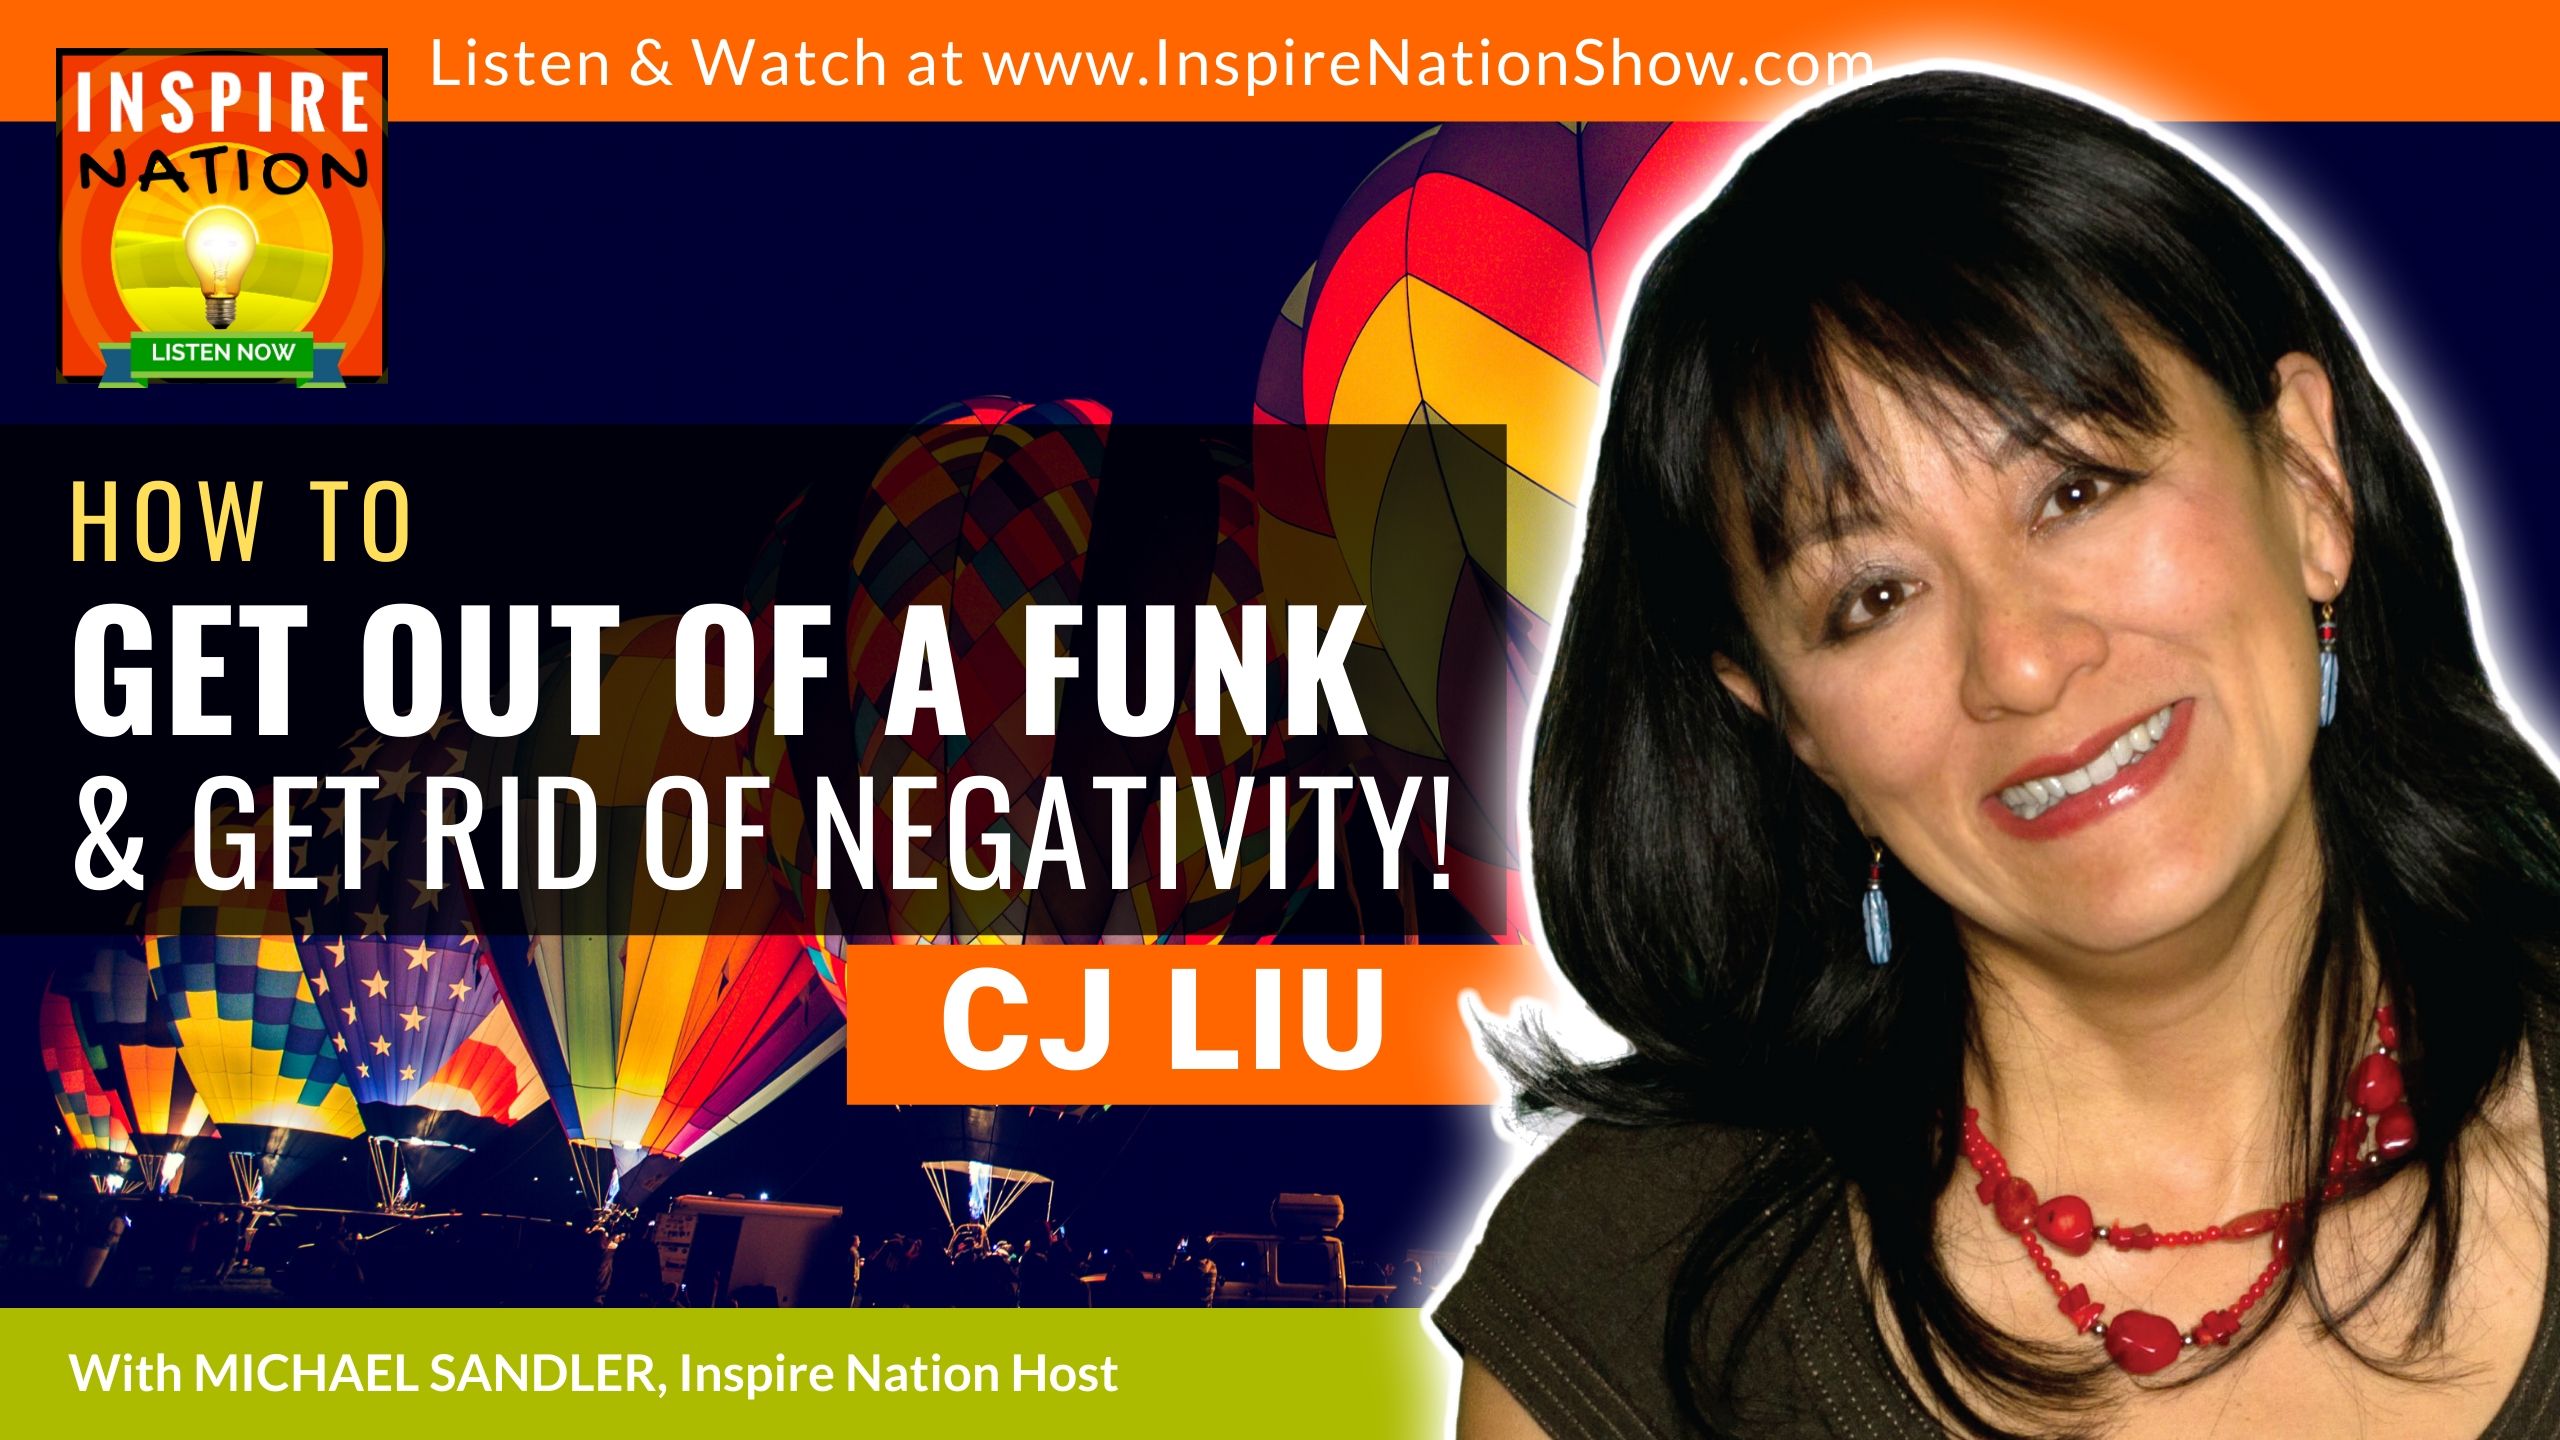 Michael Sandler and CJ Liu discuss how to get out of funk and get rid of negativity!